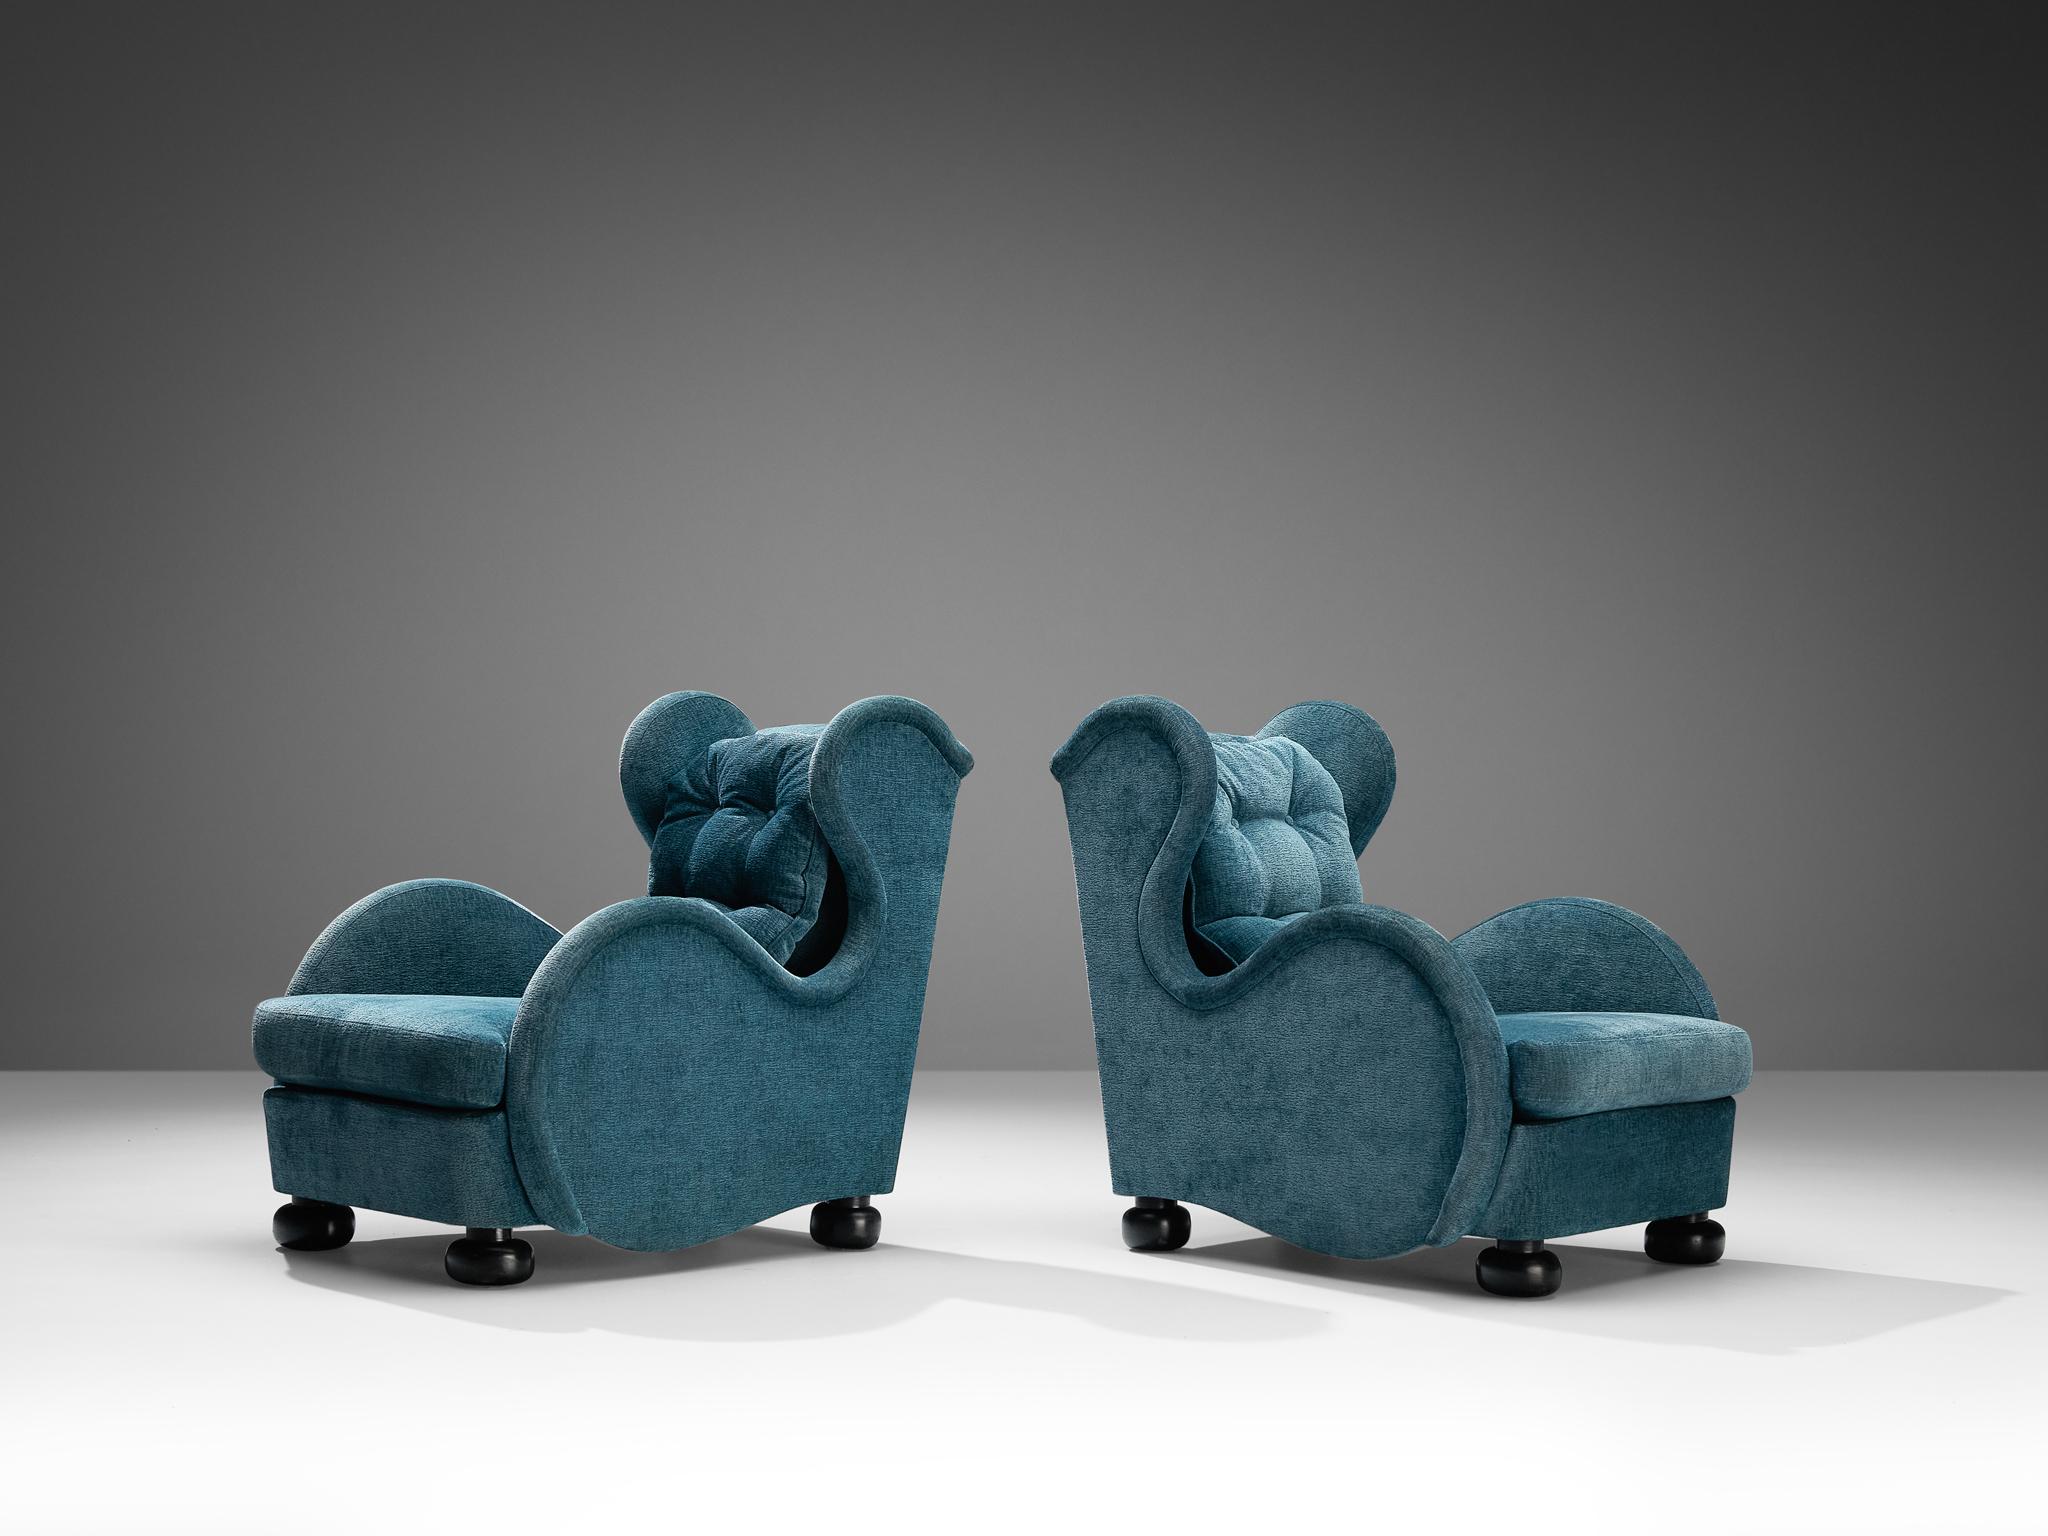 René Drouet, pair of lounge chairs, velvet, lacquered wood, France, 1940s

These magnificent lounge chairs by the French decorator René Drouet, are a quintessential representation of the late Art Deco period of the 1940s. The defining feature of